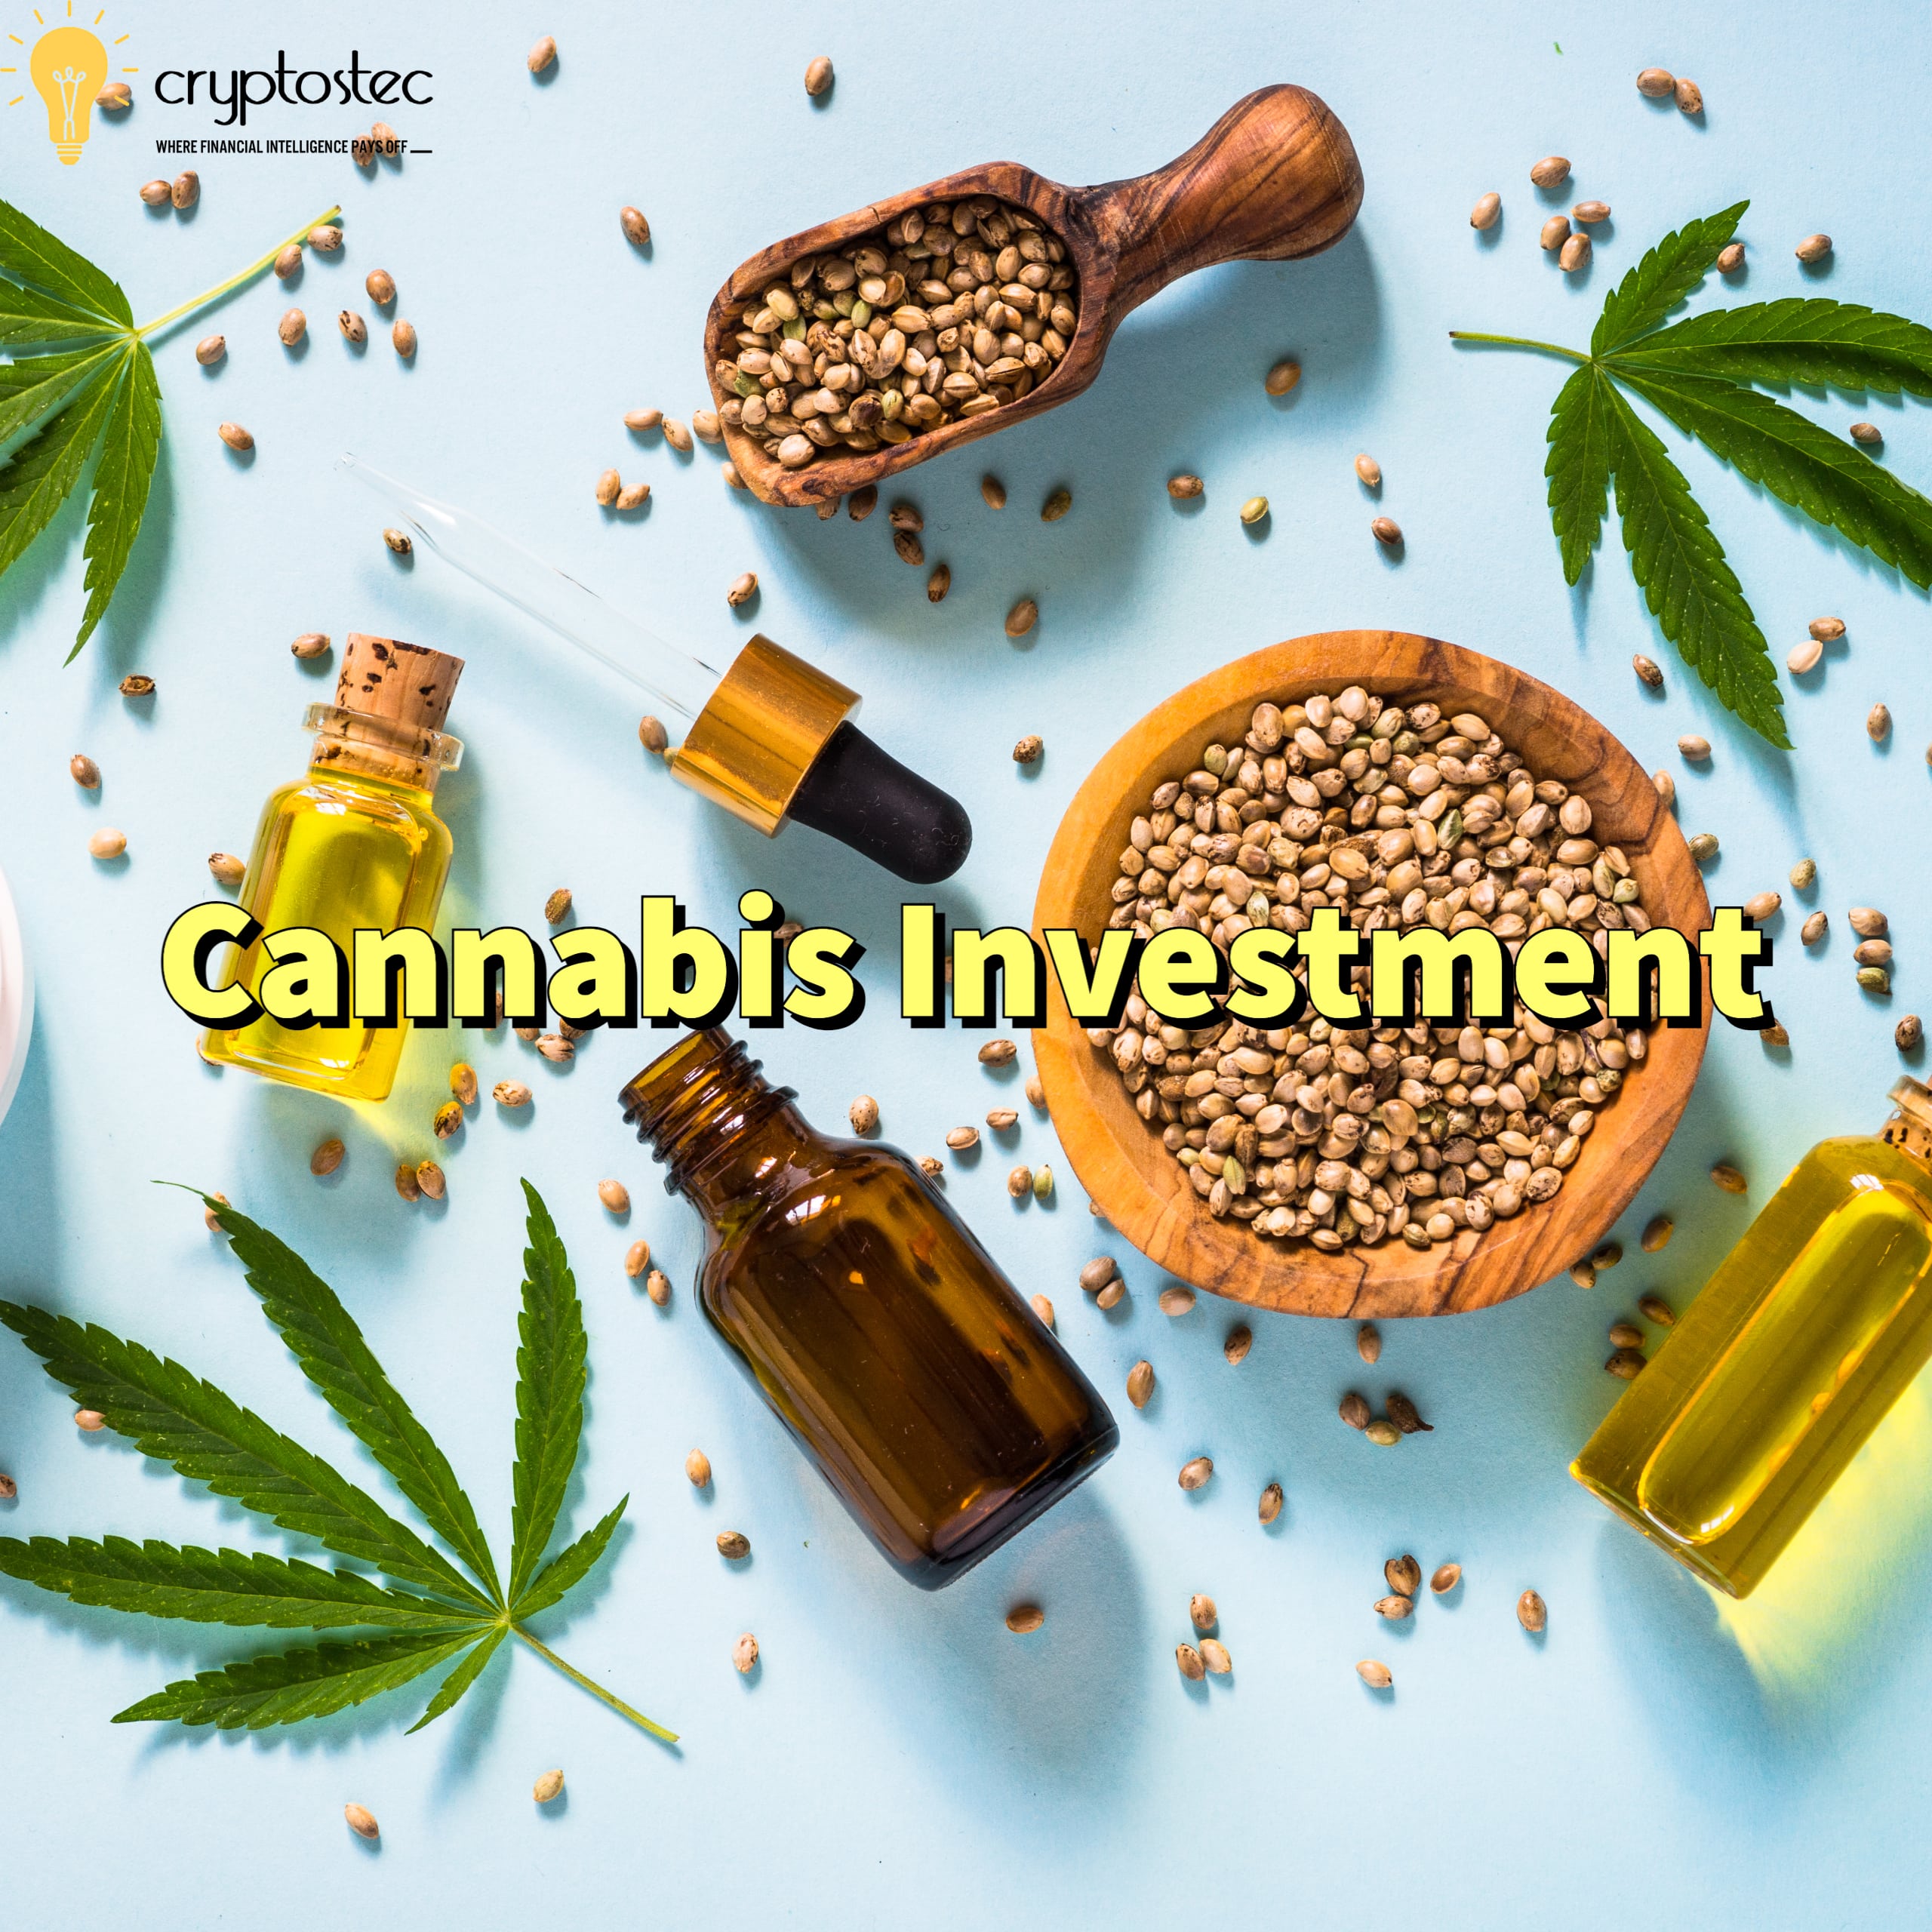 Cannabis Investments - The Complete Guide - Cryptostec